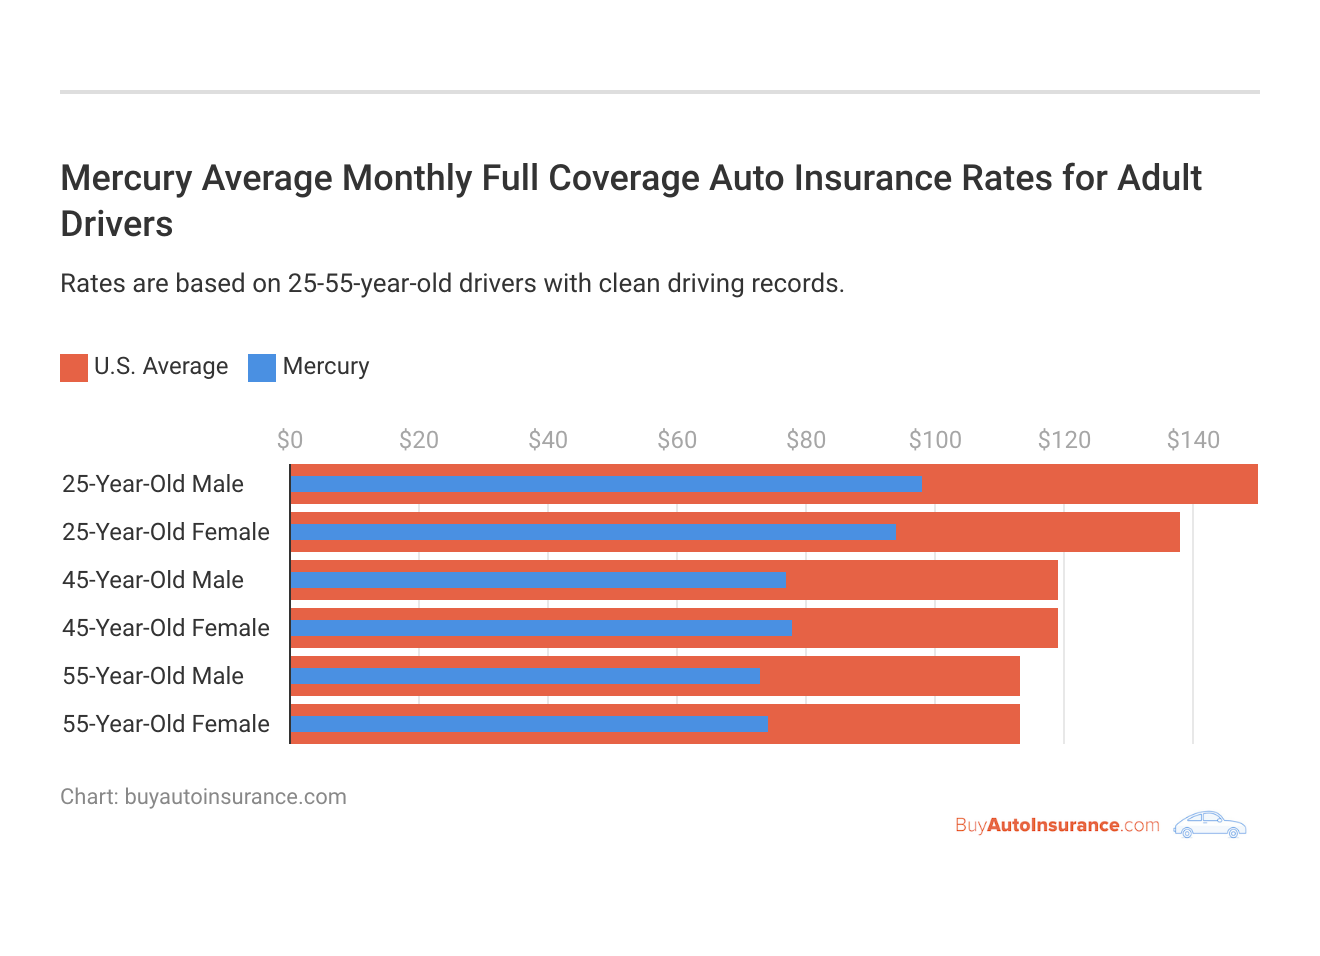 <h3>Mercury Average Monthly Full Coverage Auto Insurance Rates for Adult Drivers</h3>